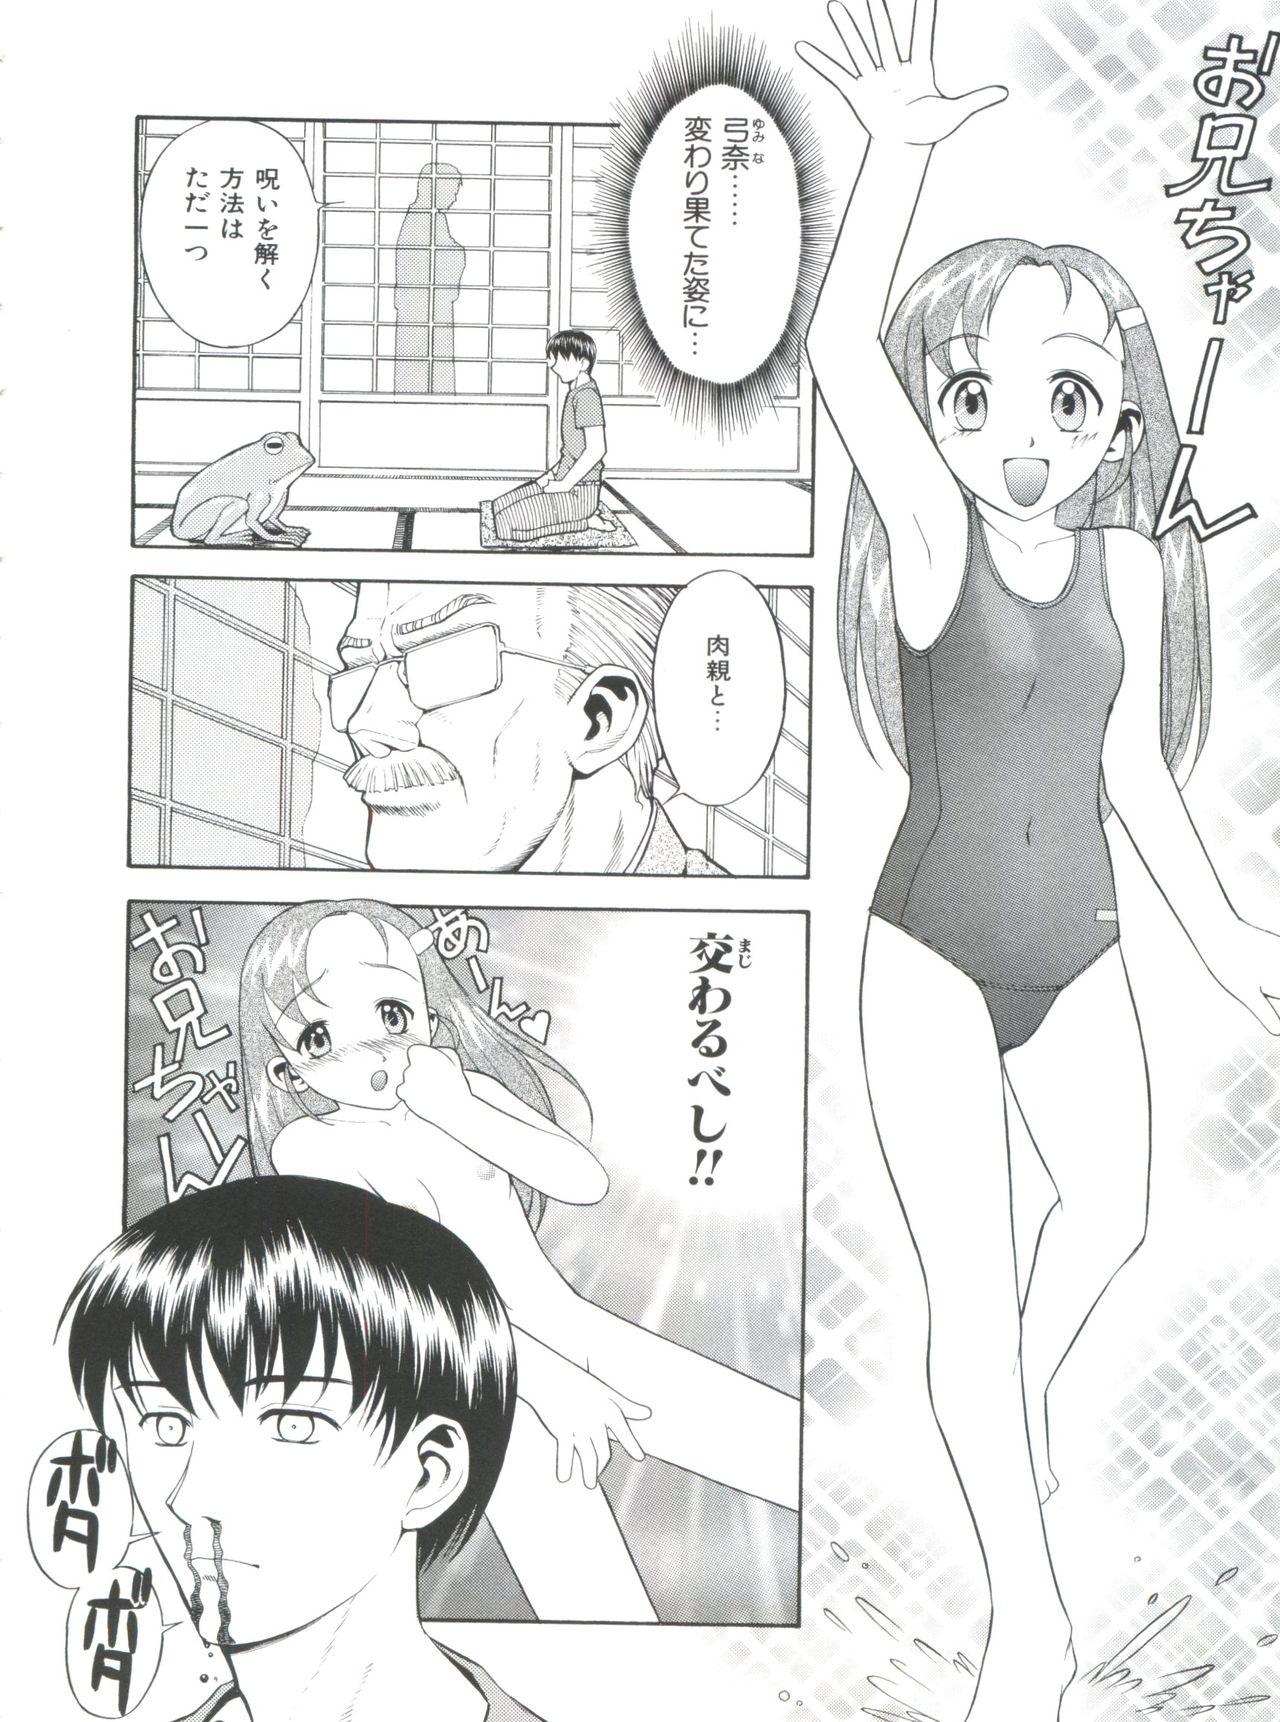 Imouto - My Little Sister 141